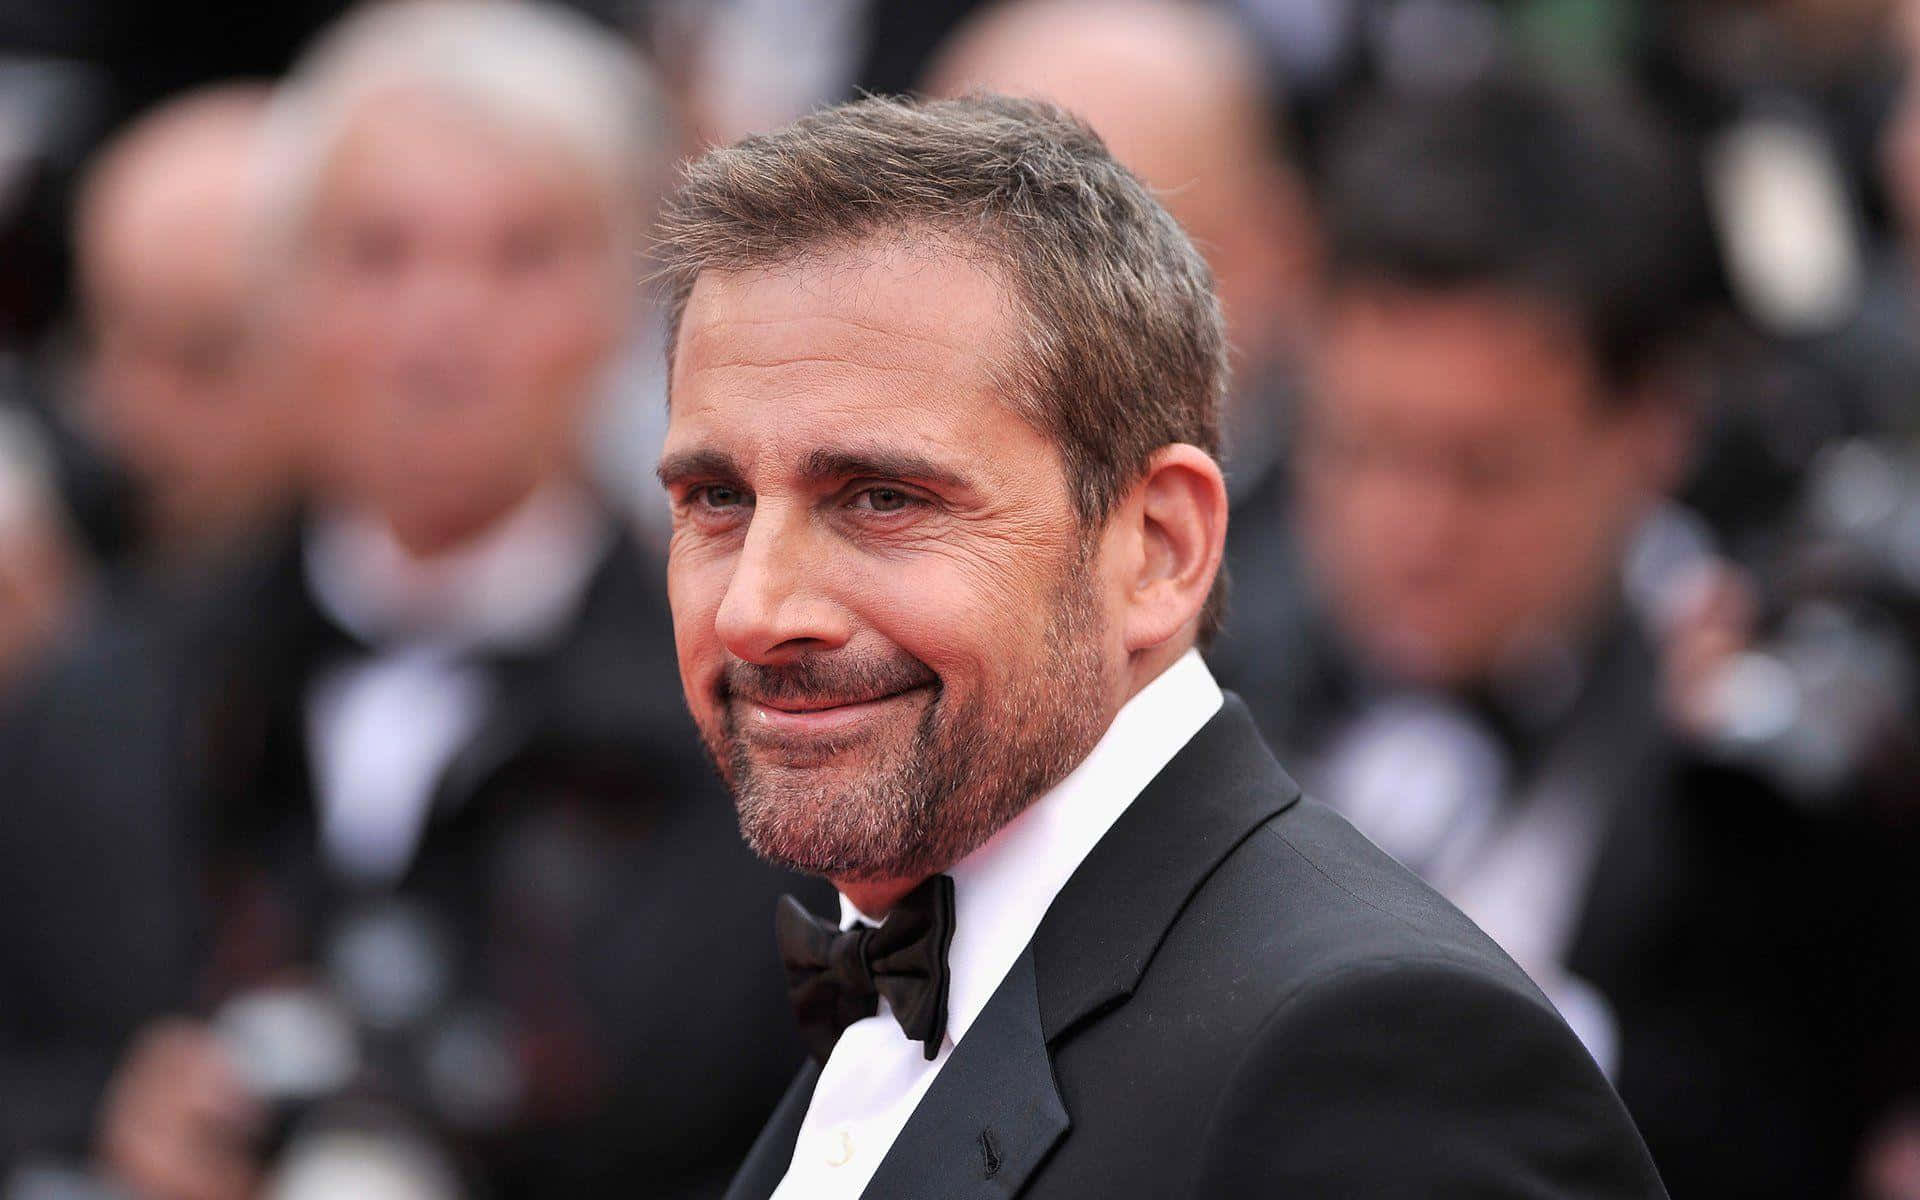 Steve Carell, actor, comedian and producer Wallpaper